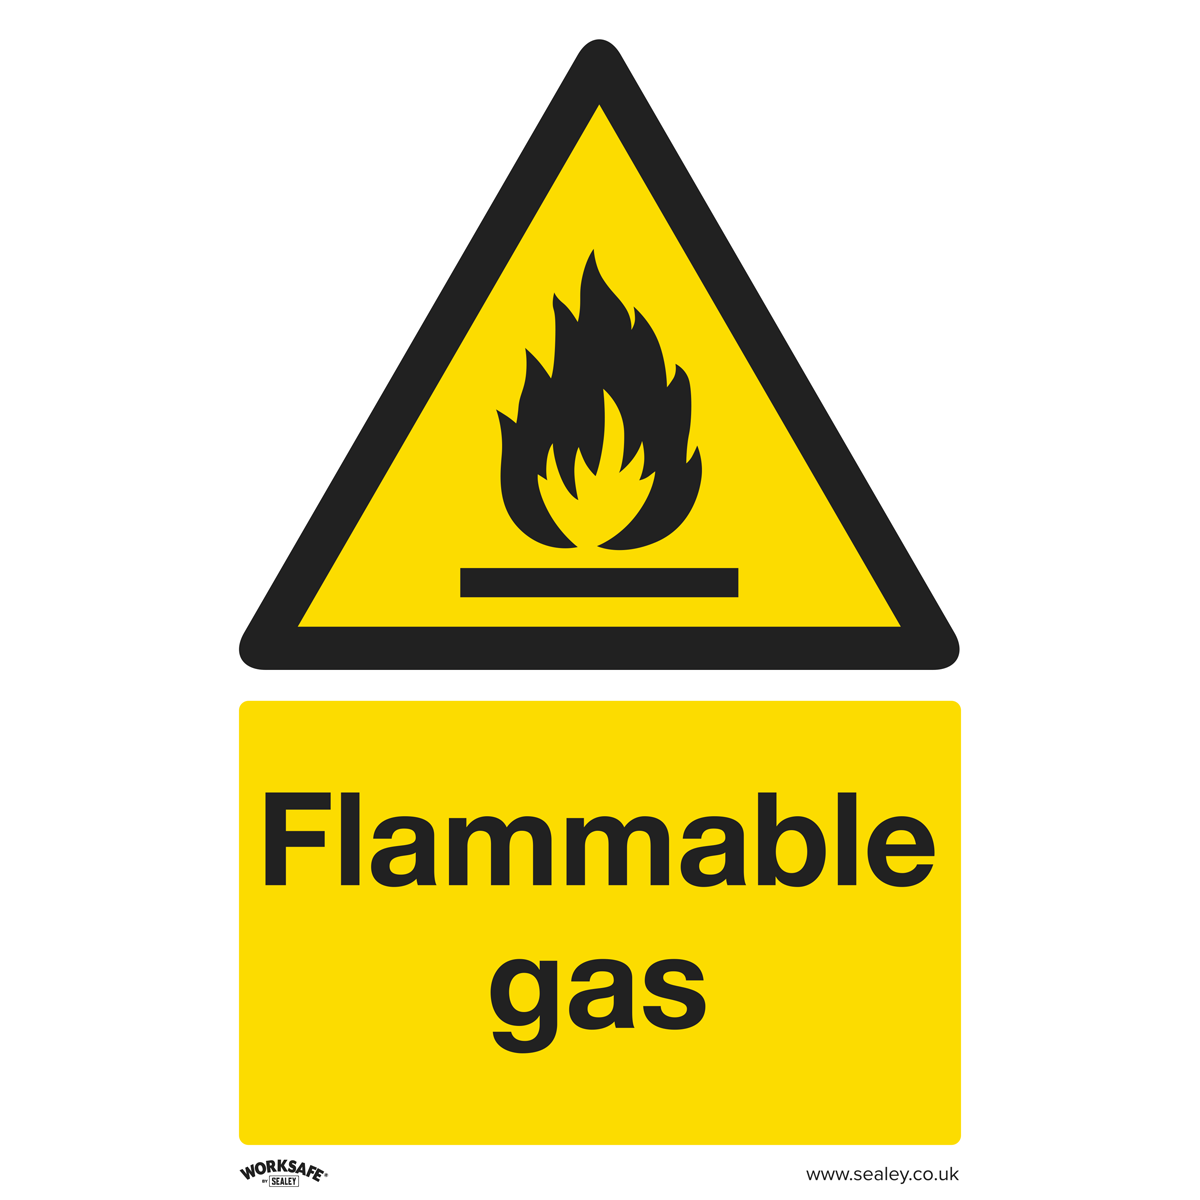 Sealey Warning Safety Sign - Flammable Gas - Self-Adhesive Vinyl - Pack of 10